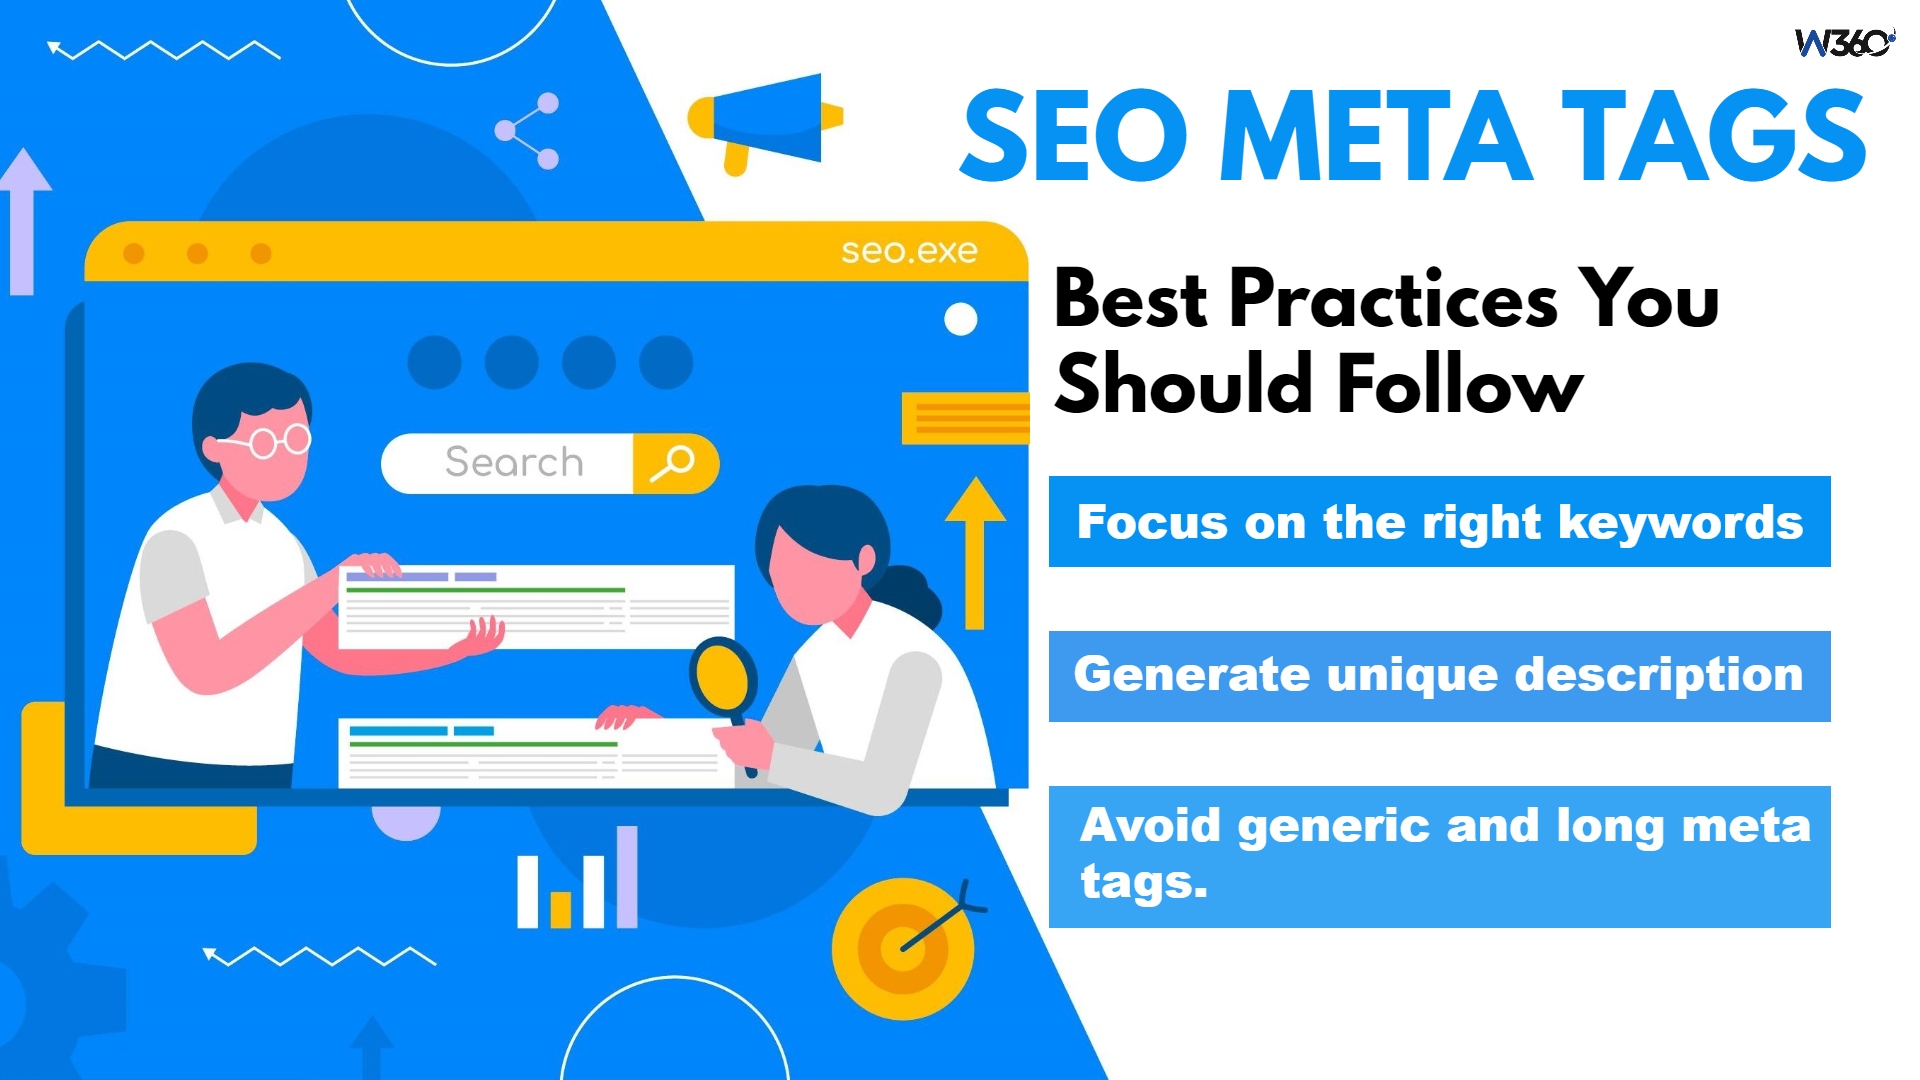 SEO Meta Tags: Best Practices You Should Follow